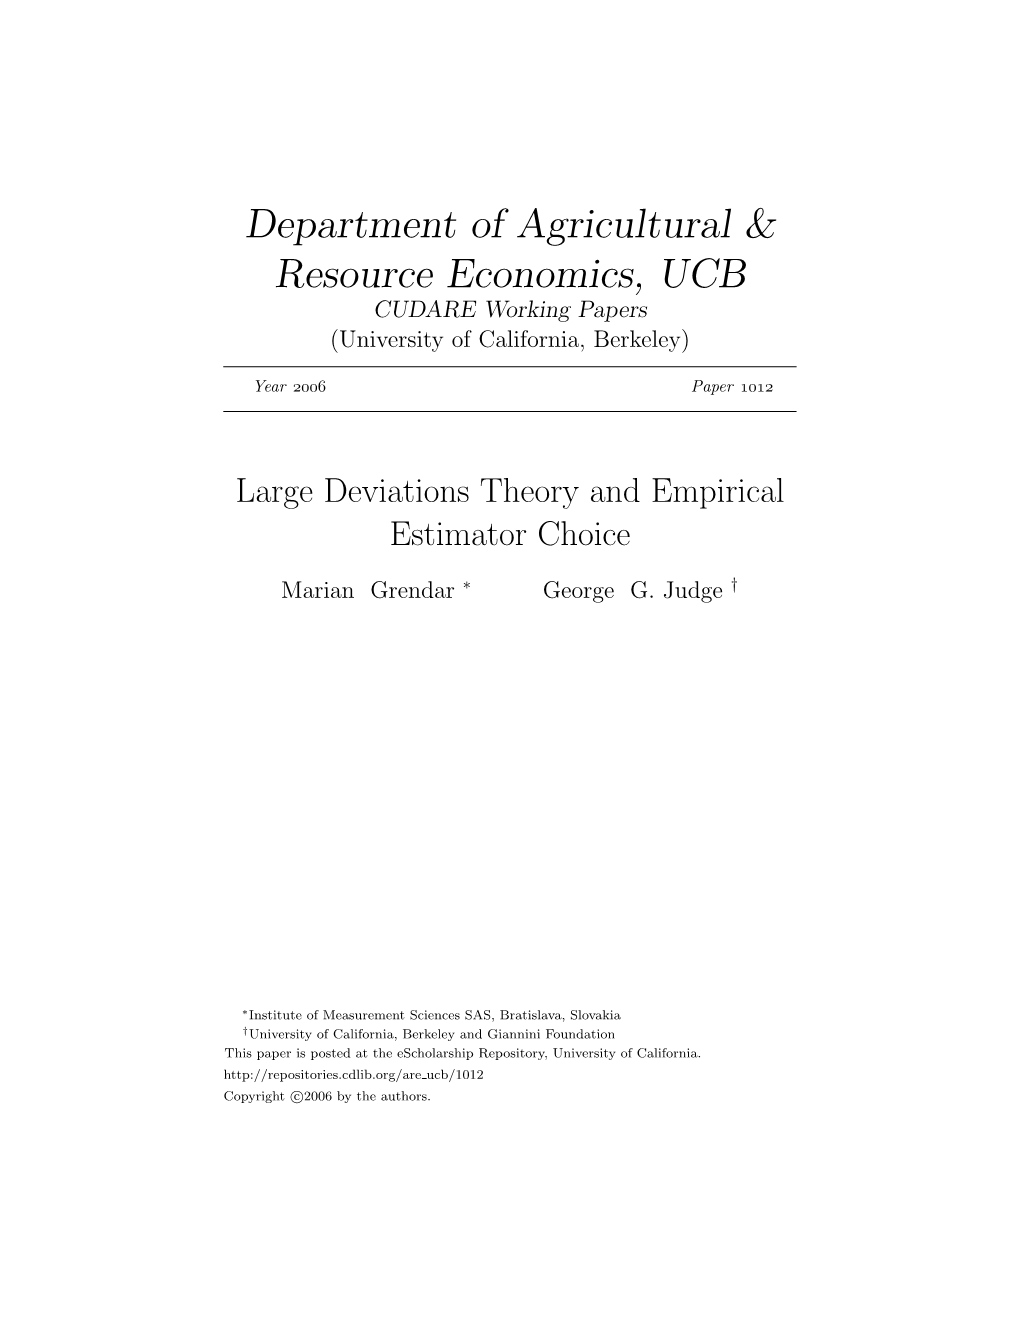 Large Deviations Theory and Empirical Estimator Choice